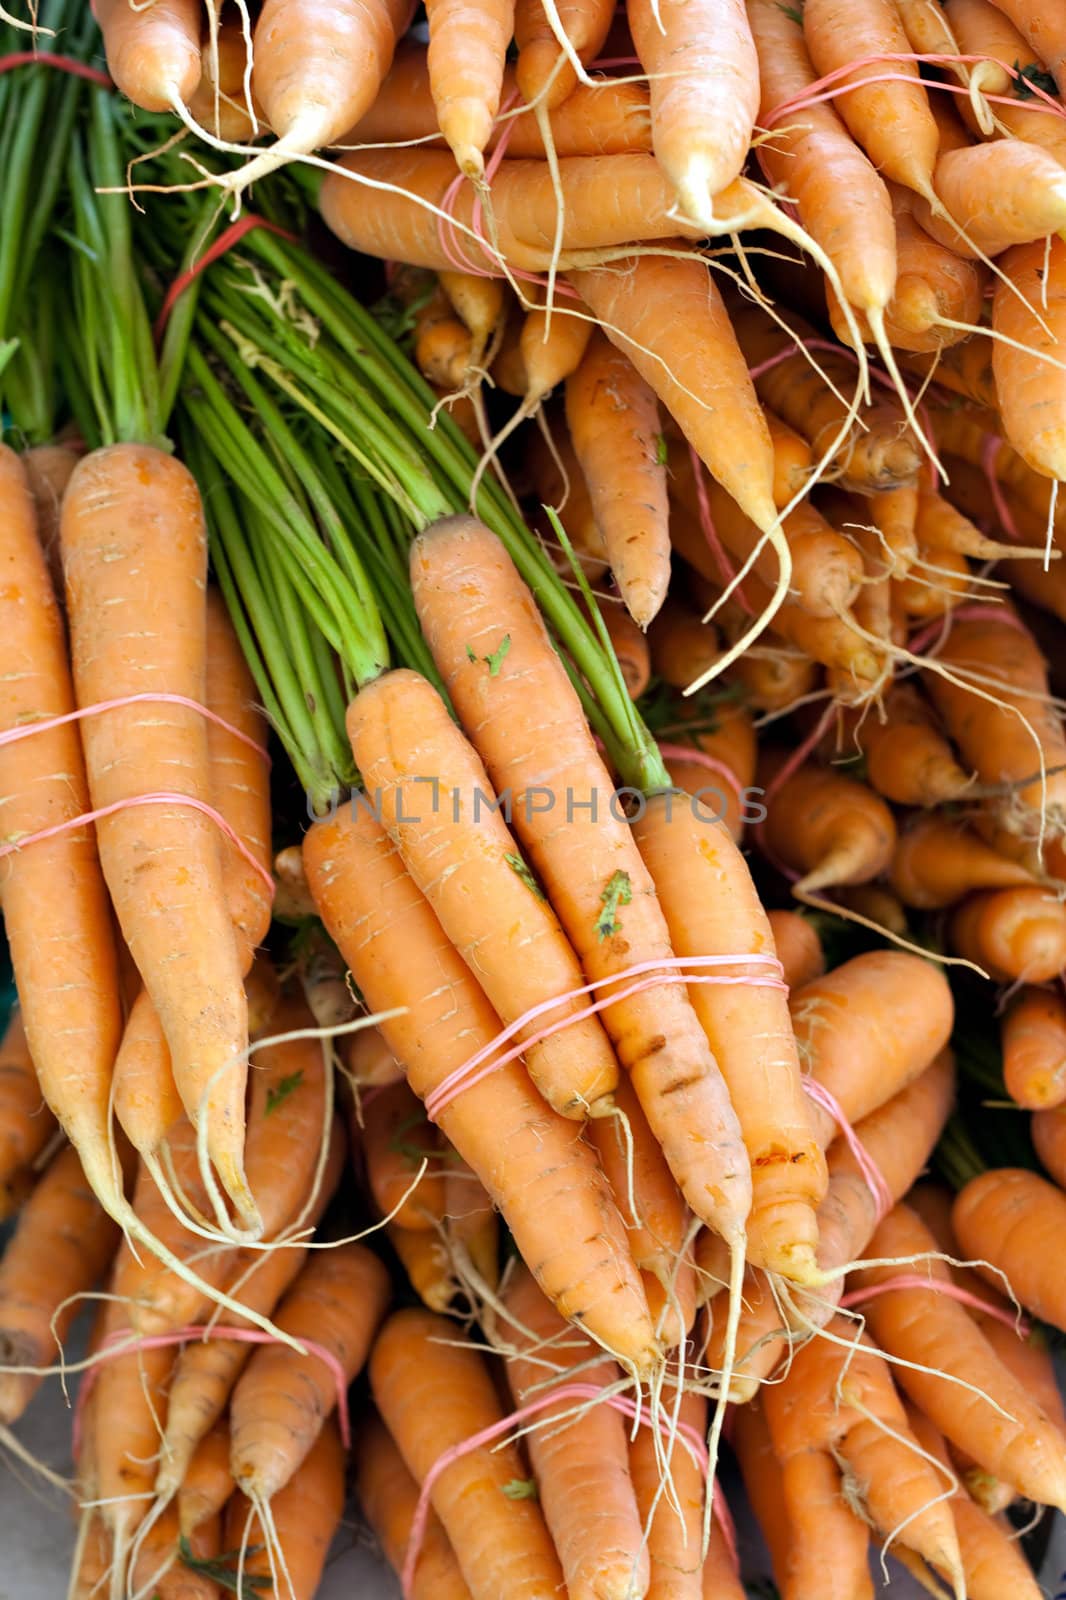 Close-up of a pile of freshly harvested carrots in bunched.  Shallow depth of field.